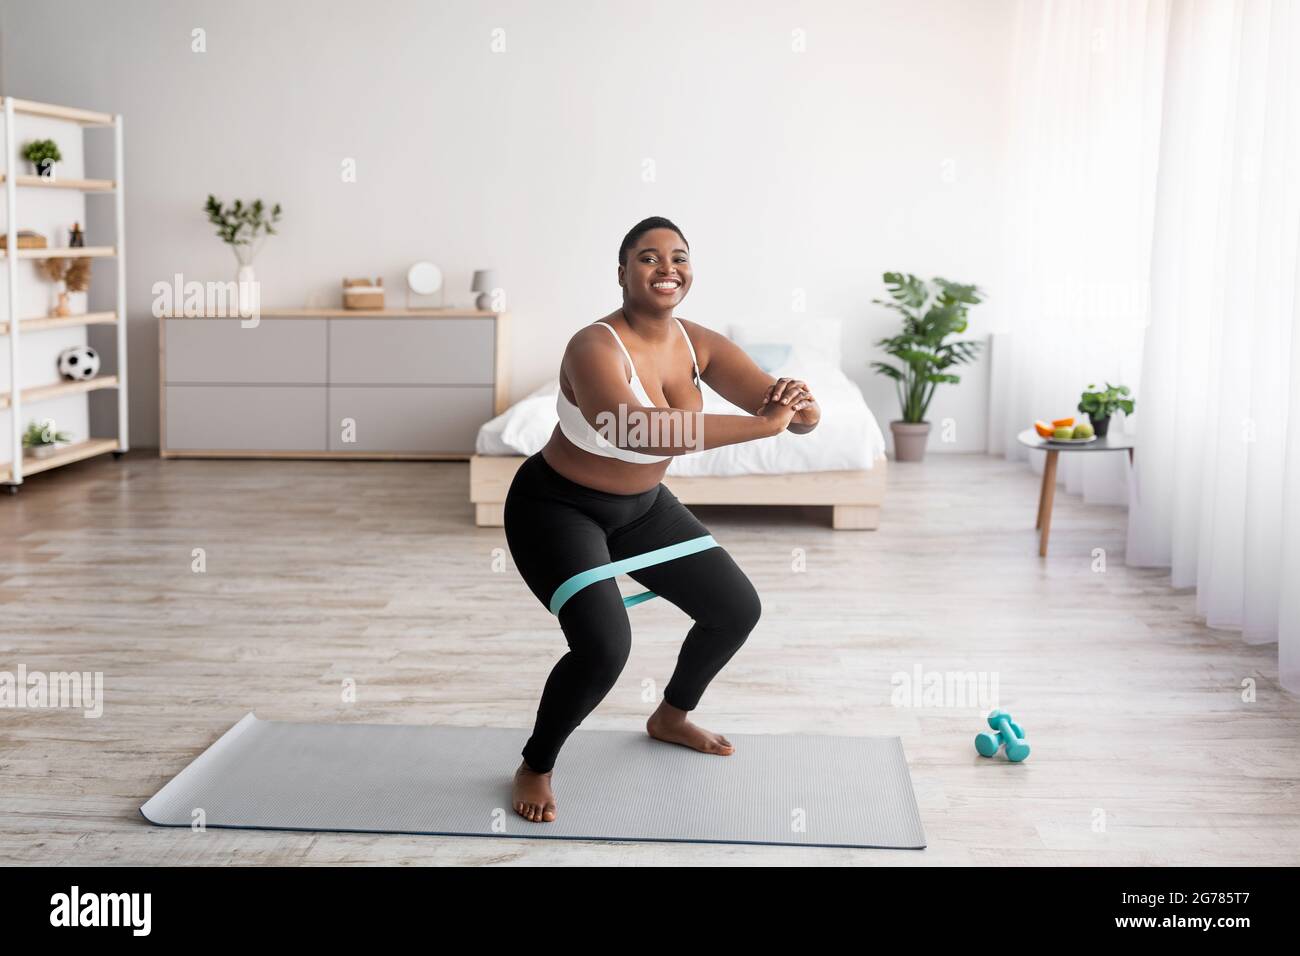 Full Length Of Curvy Black Woman Squatting With Elastic Band During Home Workout Copy Space